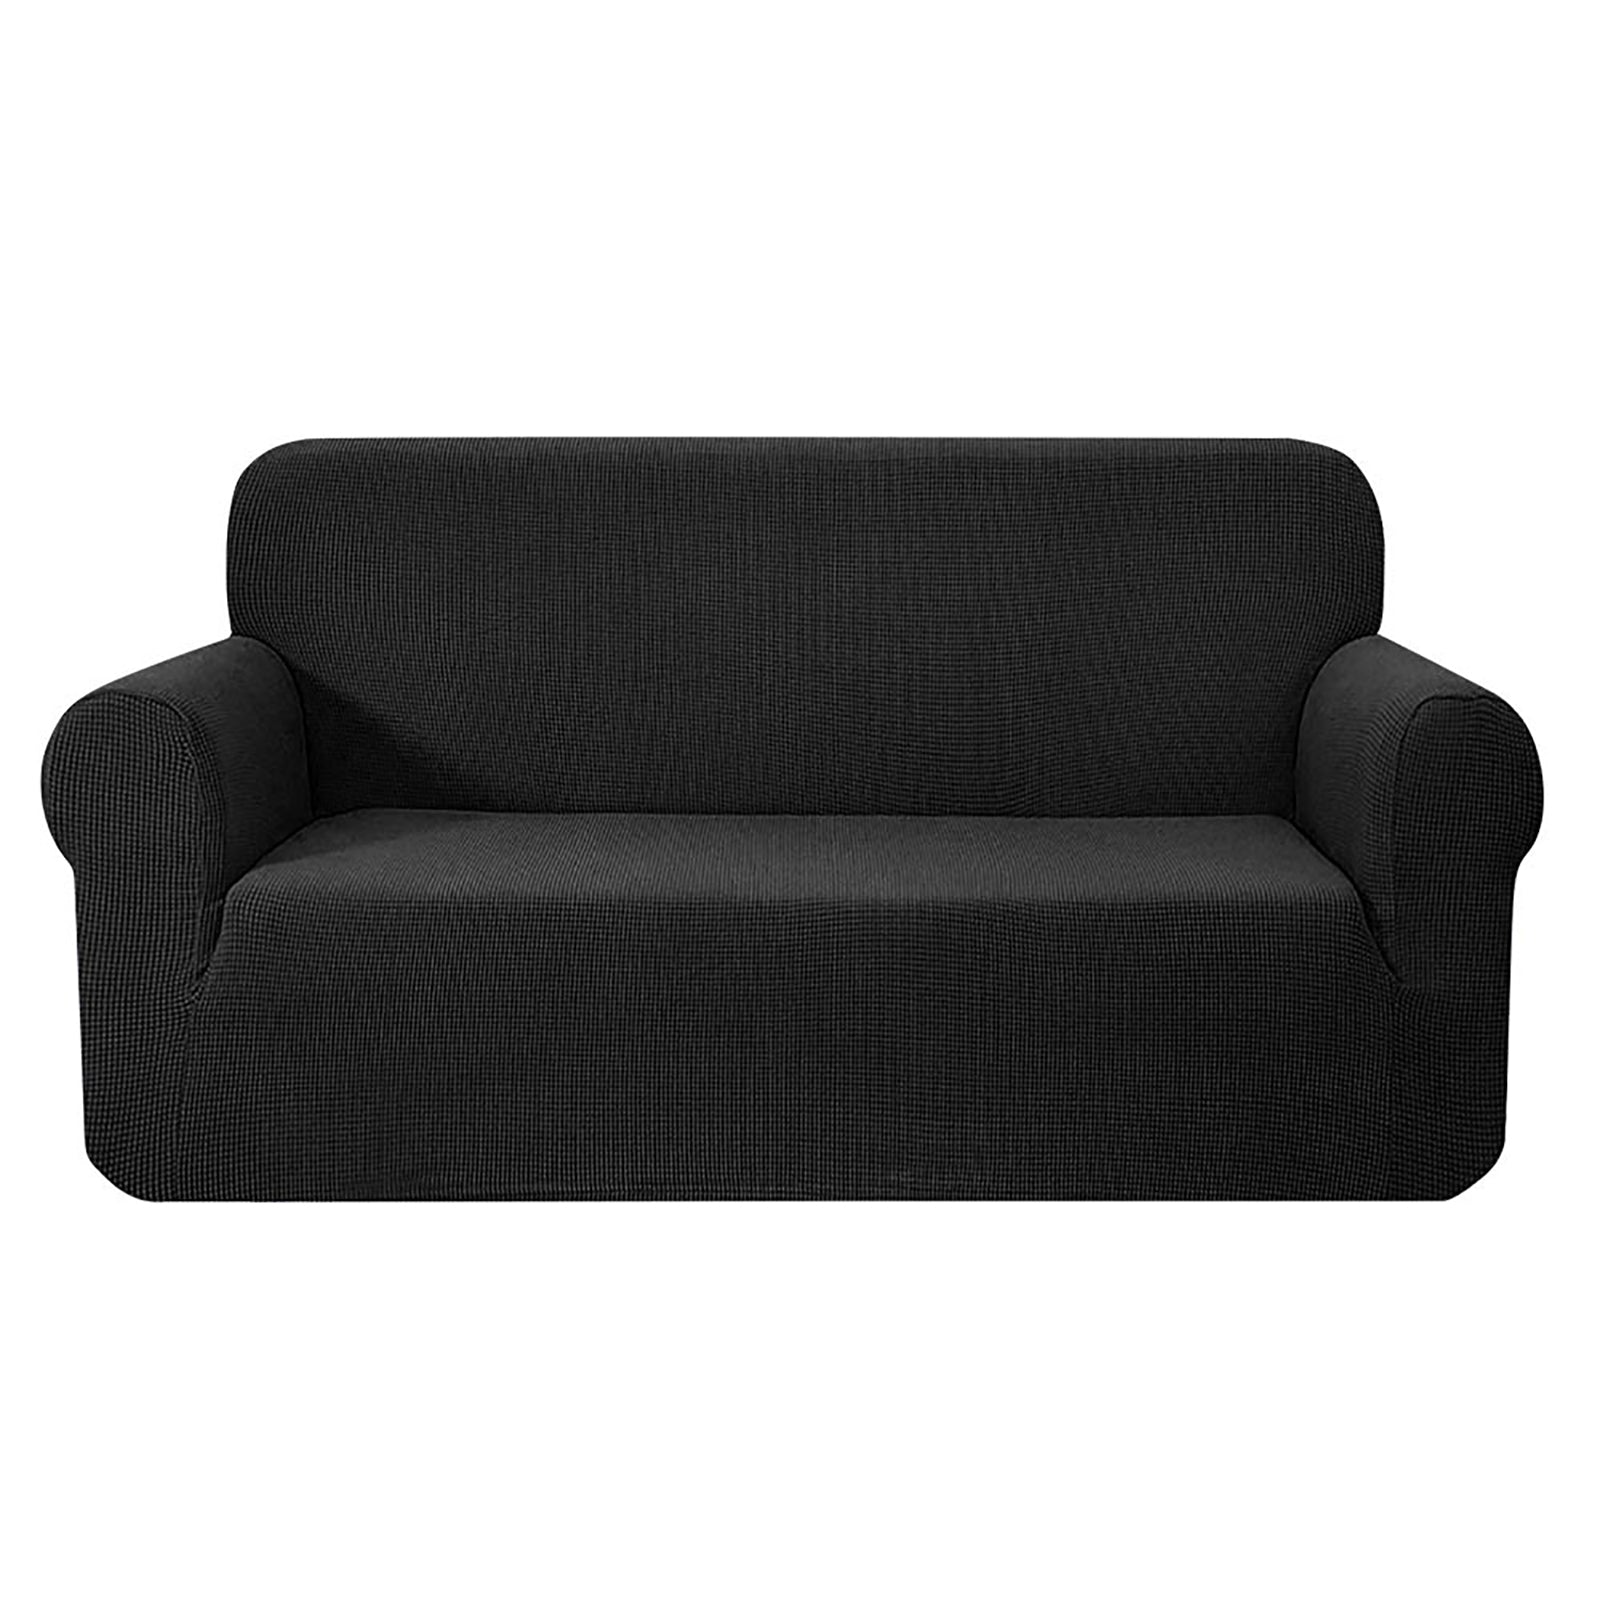 Artiss High Stretch Sofa Cover Couch Lounge Protector Slipcovers 3 Seater Black.